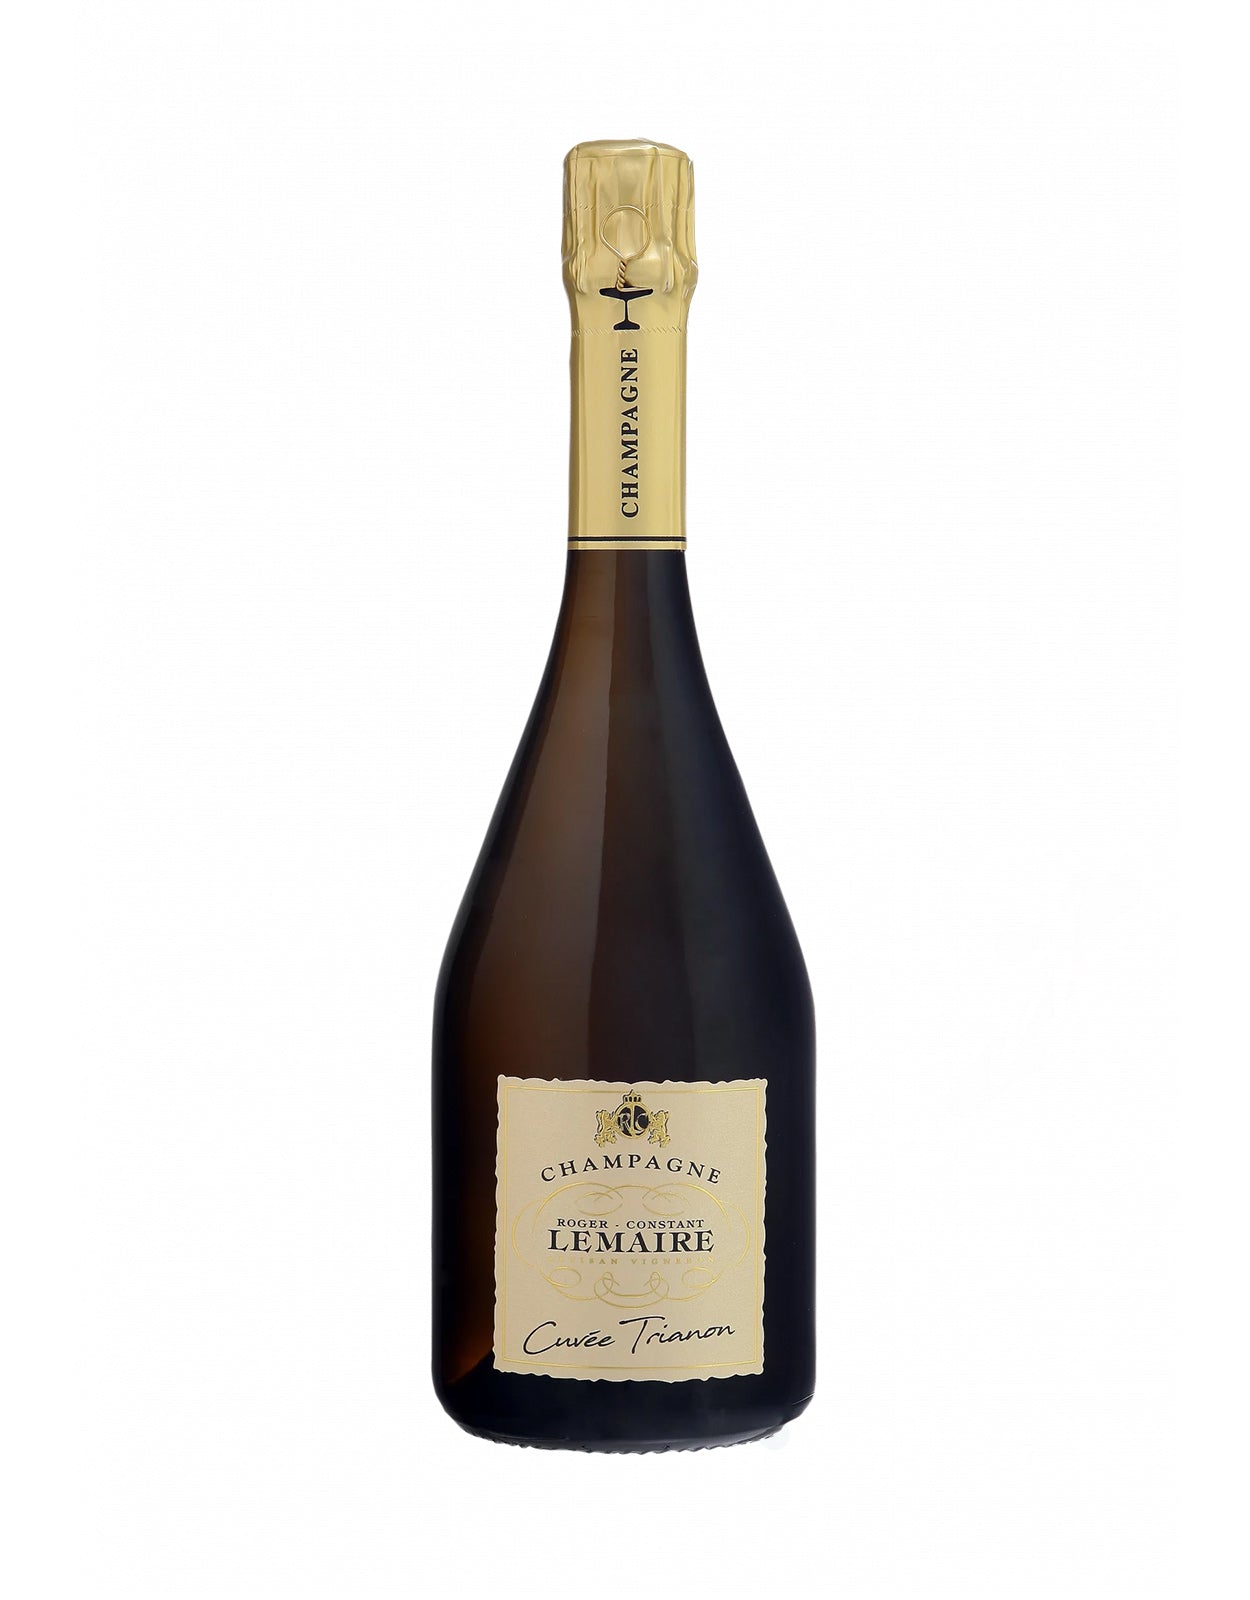 R.C. Lemaire Champagne Cuvee Trianon (NV)